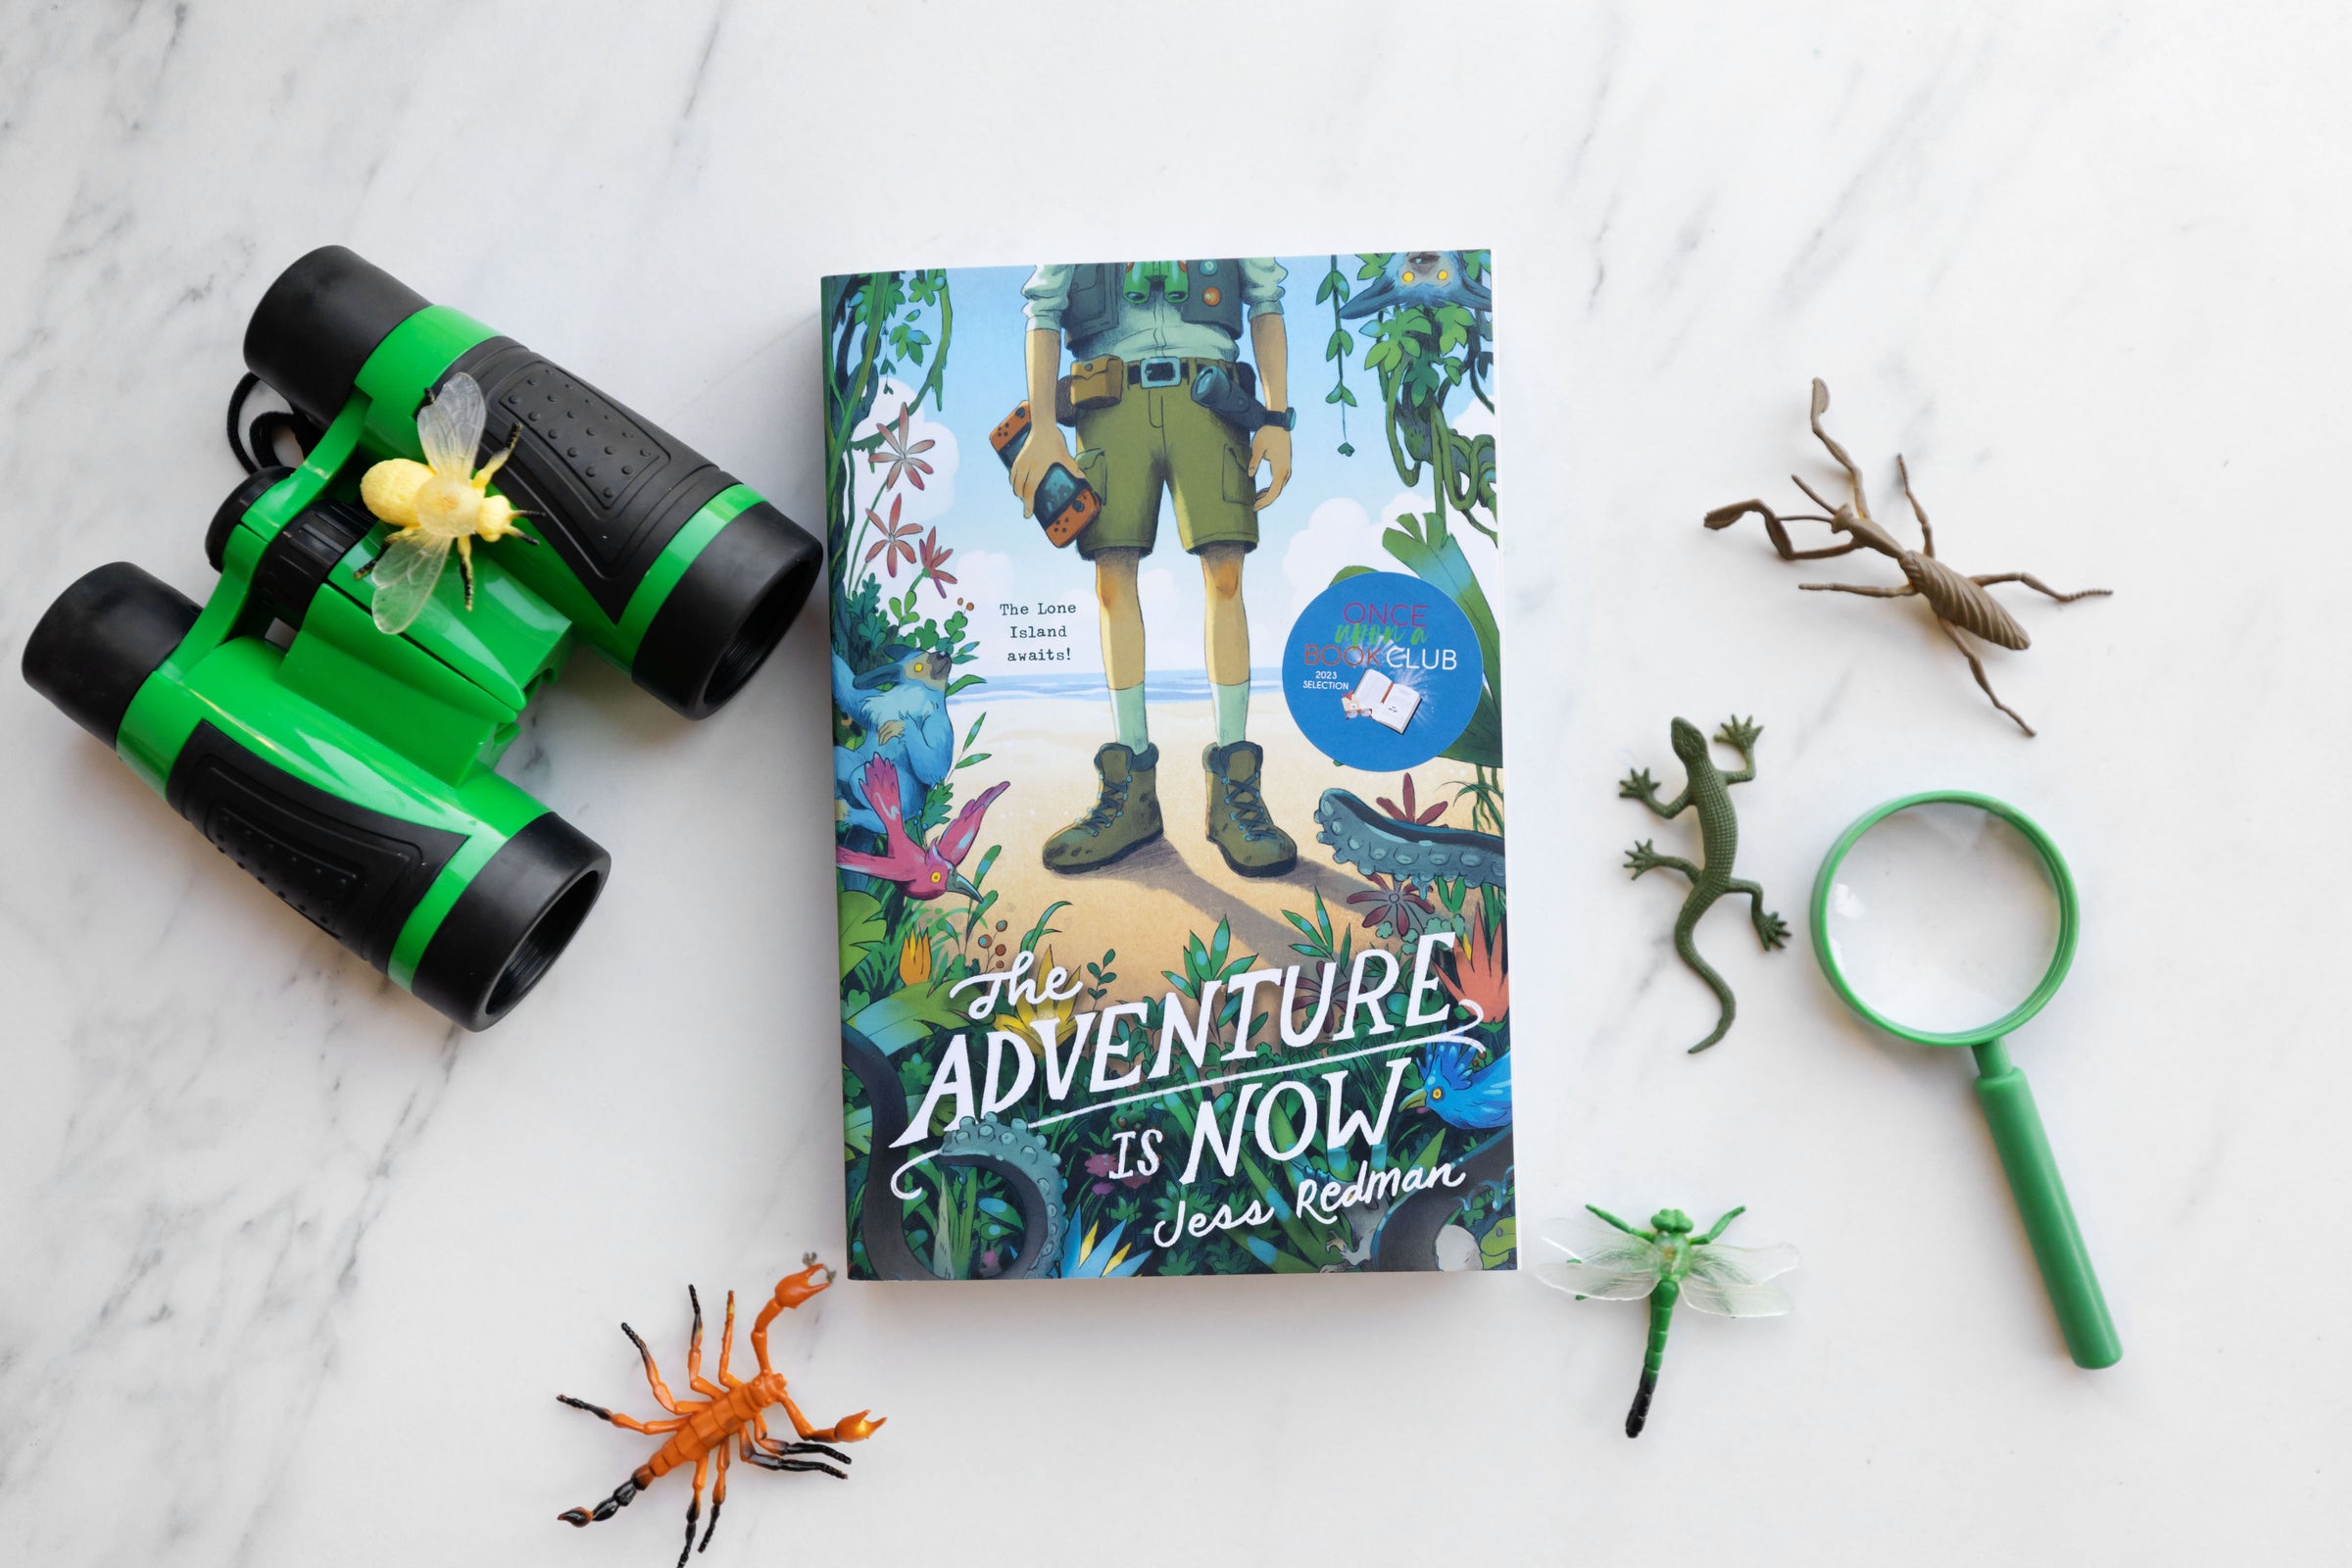 A collection of some of the items from The Brave Explorer Middle Grade box from August 2023. These include the featured book, The Adventure is Now by Jess Redman, a collection of fake rubber insects, a magnifying glass, and a pair of binoculars.